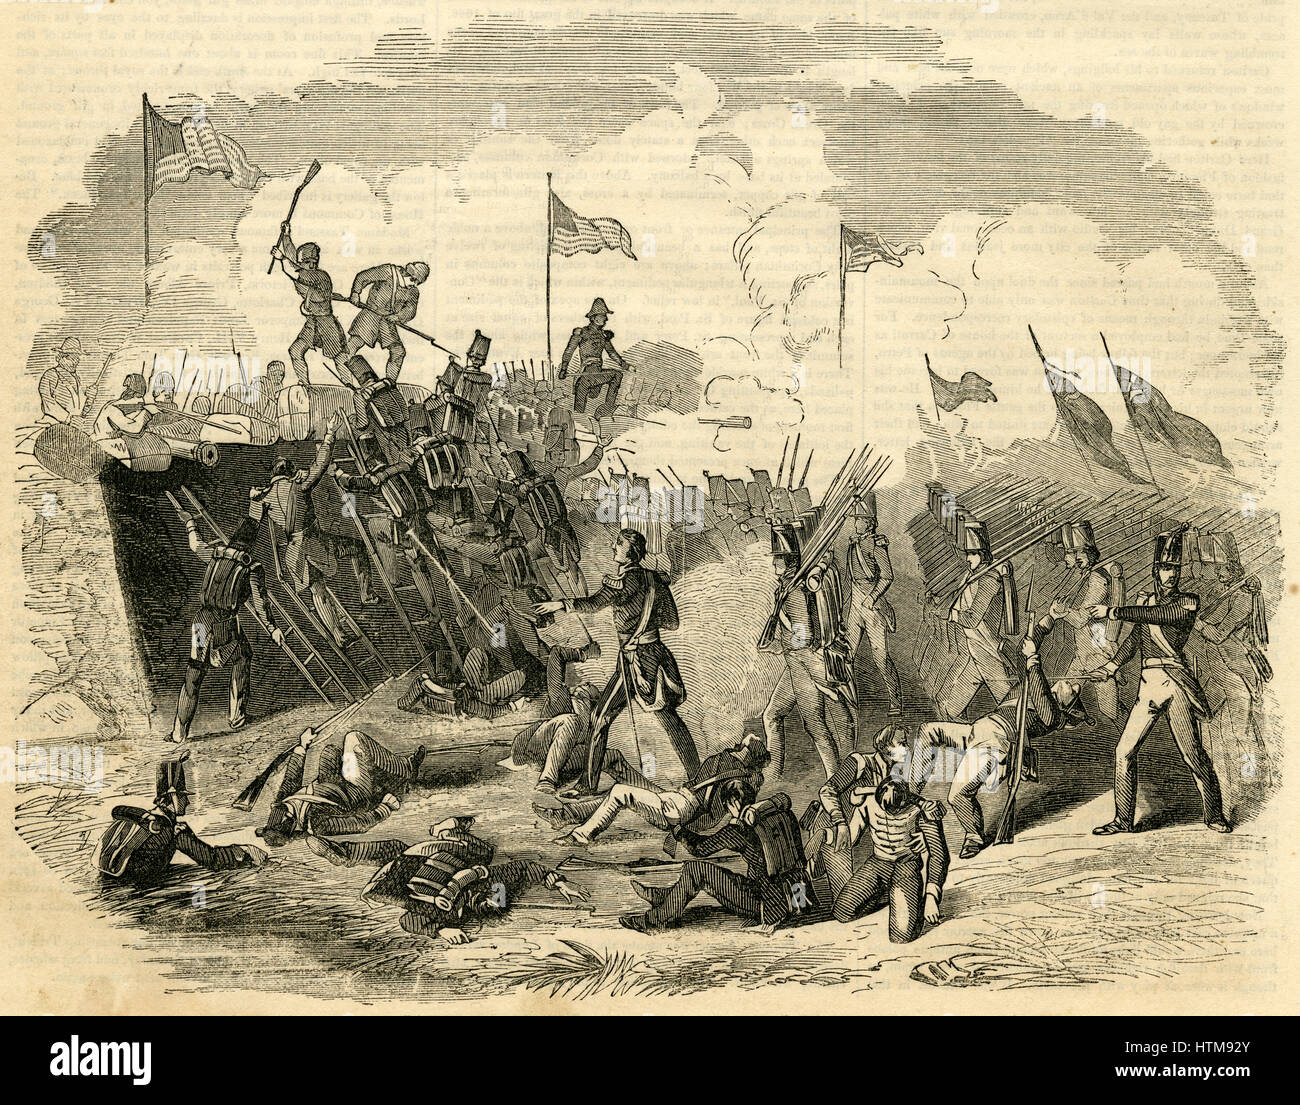 Antique 1854 engraving, 'Battle of New Orleans Ñ from a Painting by Merritt.' The Battle of New Orleans was an engagement fought in January 1815, constituting the final major battle of the War of 1812, and the most one-sided battle of that war. American combatants, commanded by Major General Andrew Jackson, prevented an overwhelming British force, commanded by Admiral Alexander Cochrane and General Edward Pakenham, from seizing New Orleans and the vast territory the United States had acquired with the Louisiana Purchase. SOURCE: ORIGINAL ENGRAVING. Stock Photo